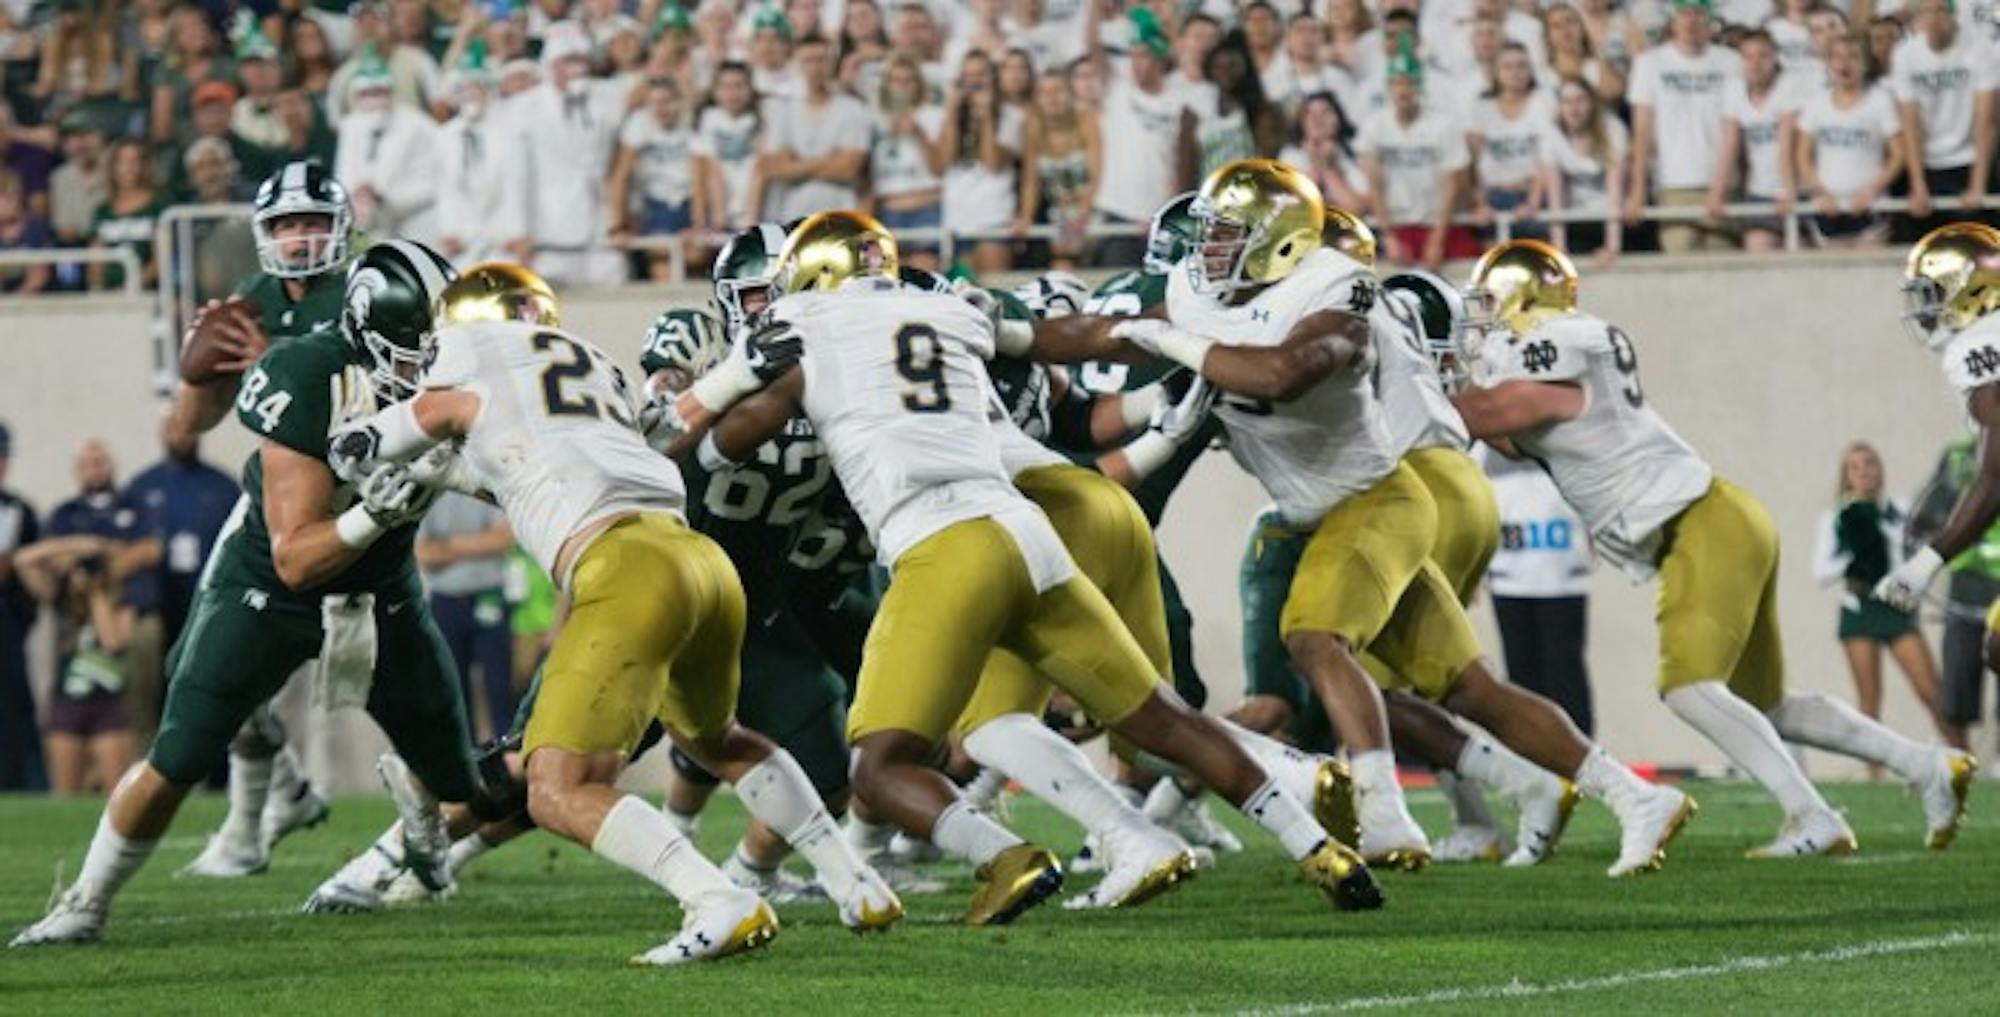 Irish sophomore defensive lineman Daelin Hayes, second from the left, fights against a block during Notre Dame’s 38-18 victory over Michigan State on Sept. 23 at Spartan Stadium in East Lansing, Michigan. Hayes has recorded 14 tackles and two sacks this season. Hayes played in all 12 games last season after suffering multiple injuries in high school.